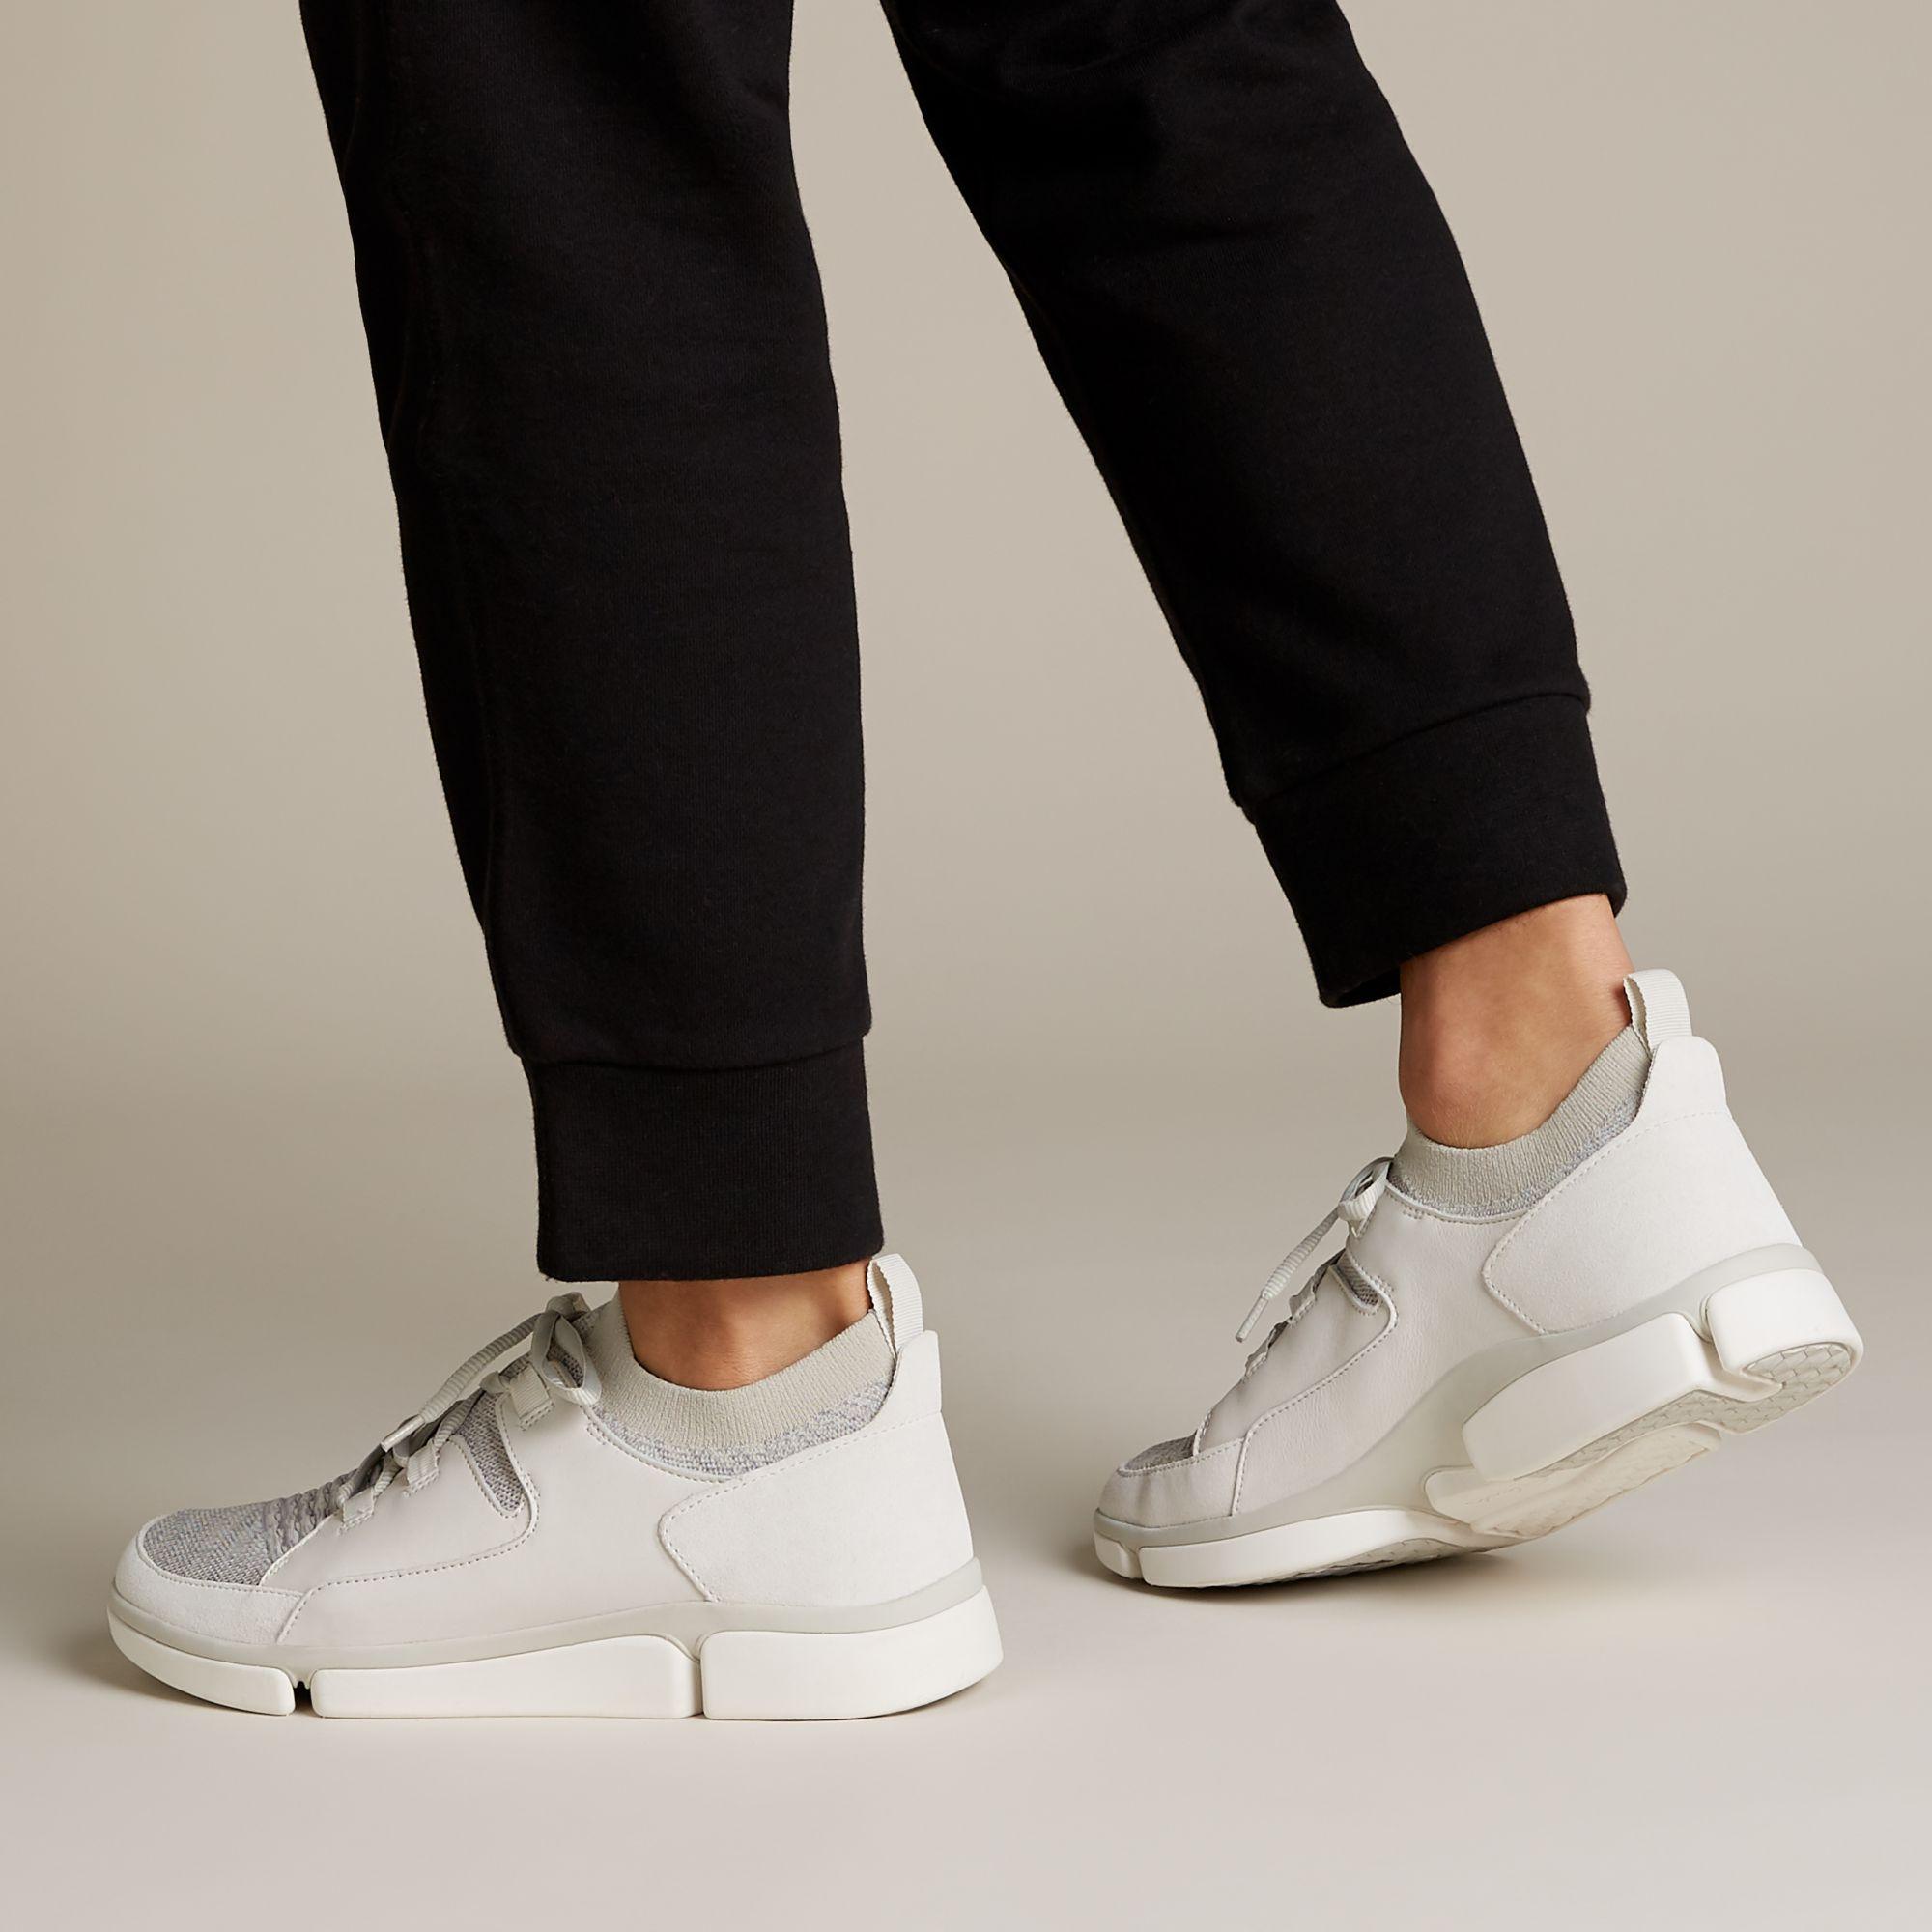 Clarks Leather Tri Verve Free in White 